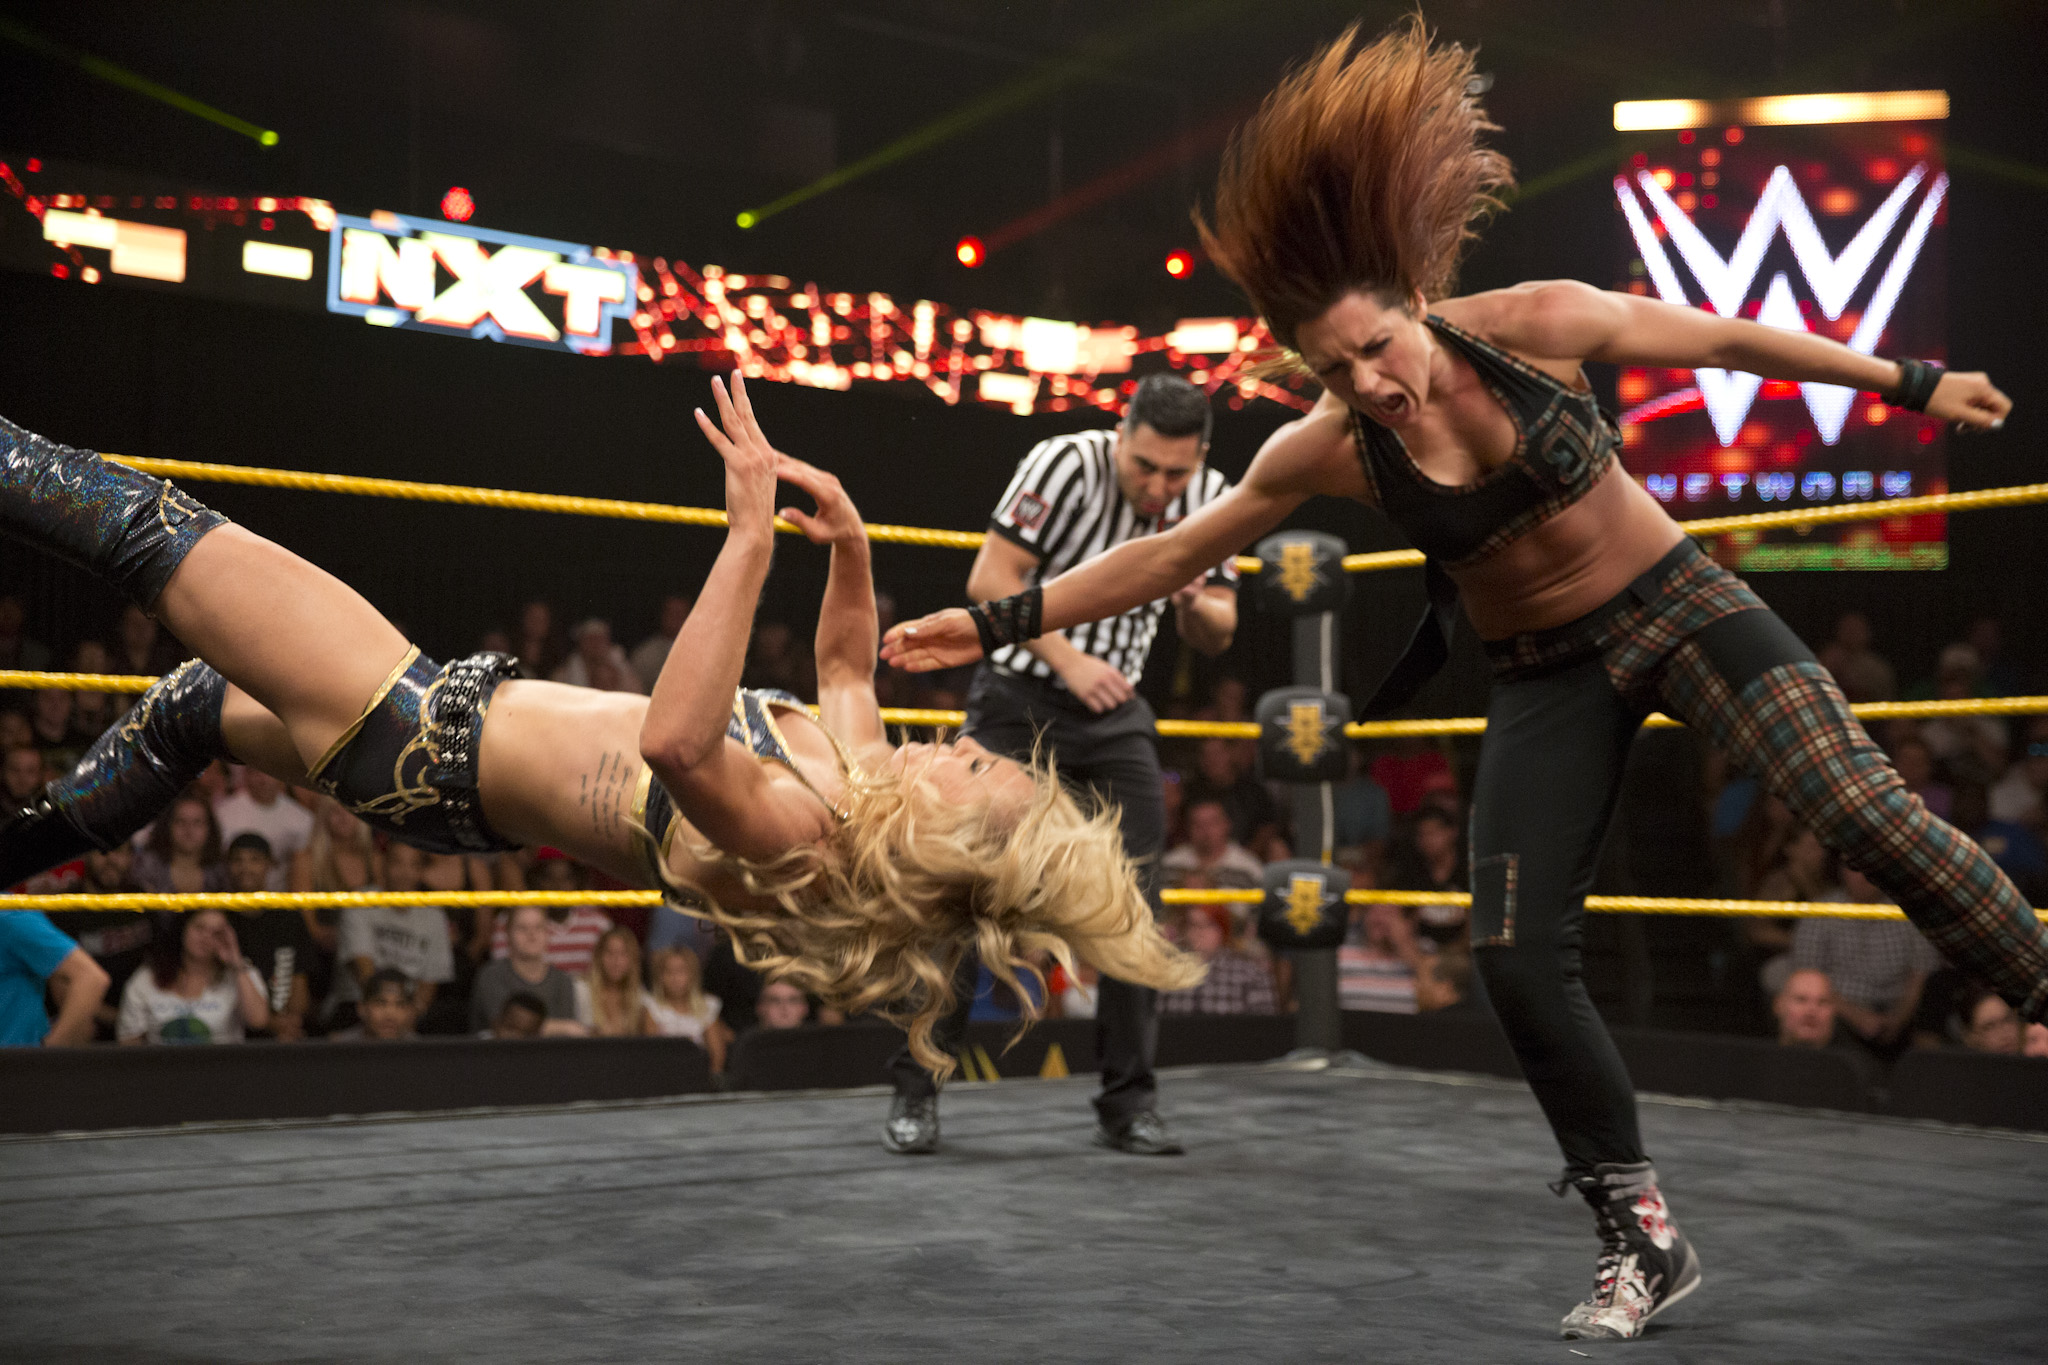 Becky Lynch using her signature move, the “Dis-arm-Her,” on opponent Charlotte Flair.